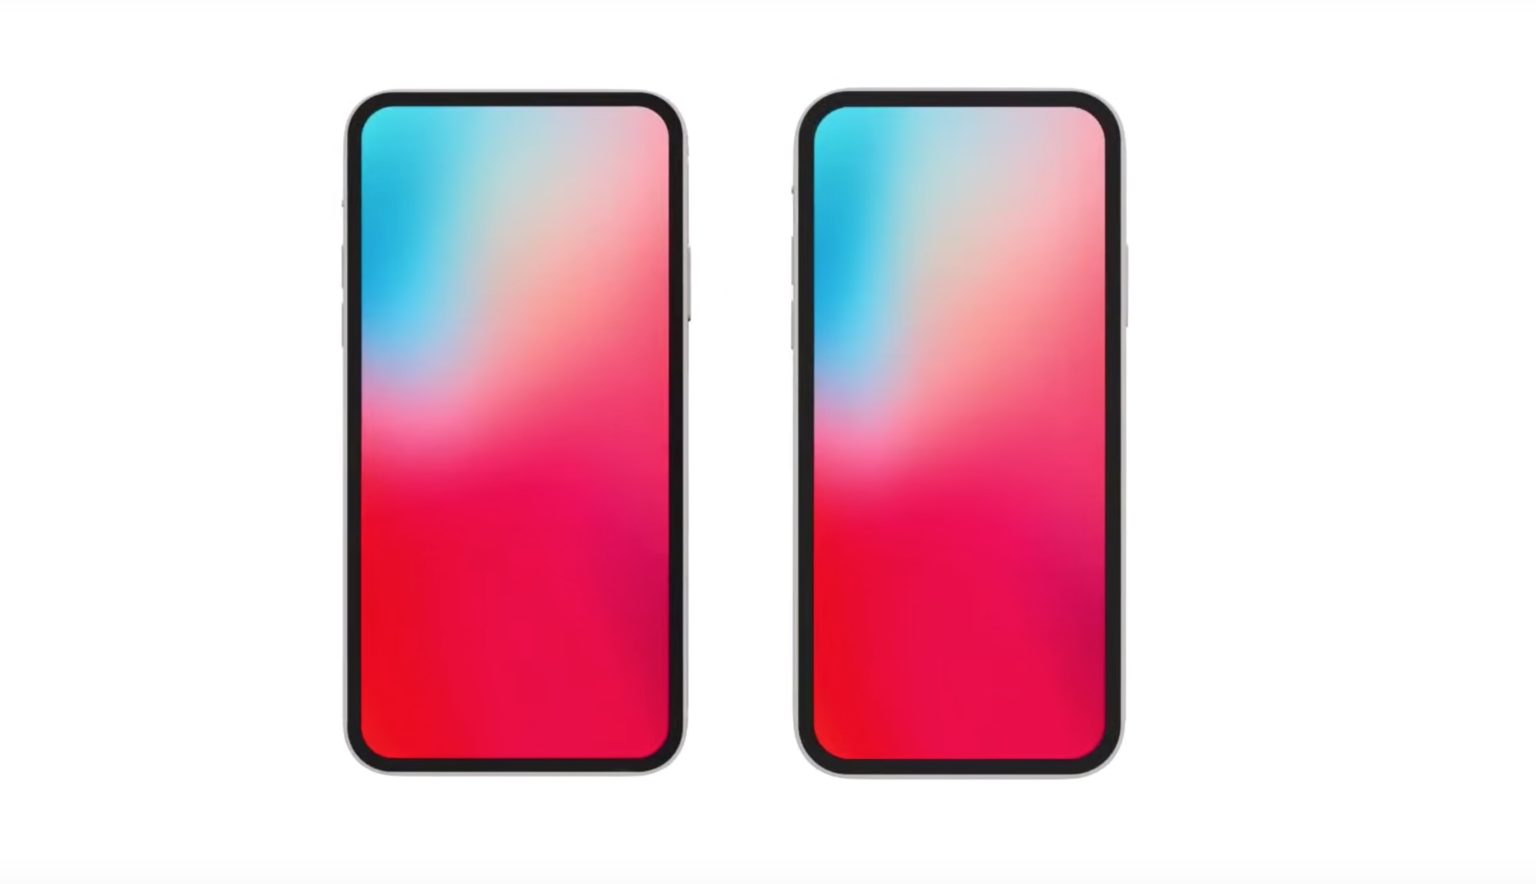 iphone 12 without notch